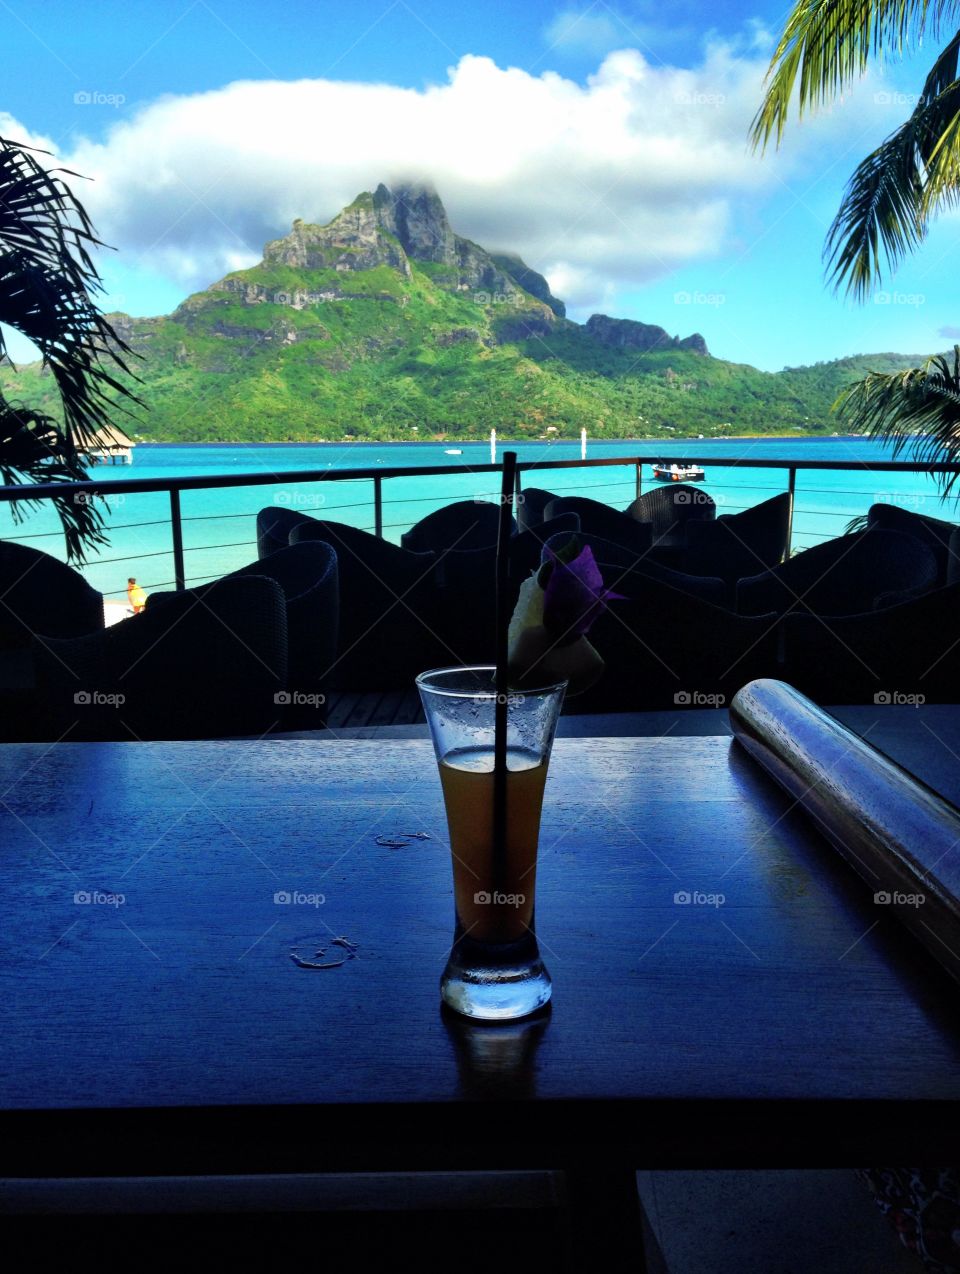 The first drink in paradise.